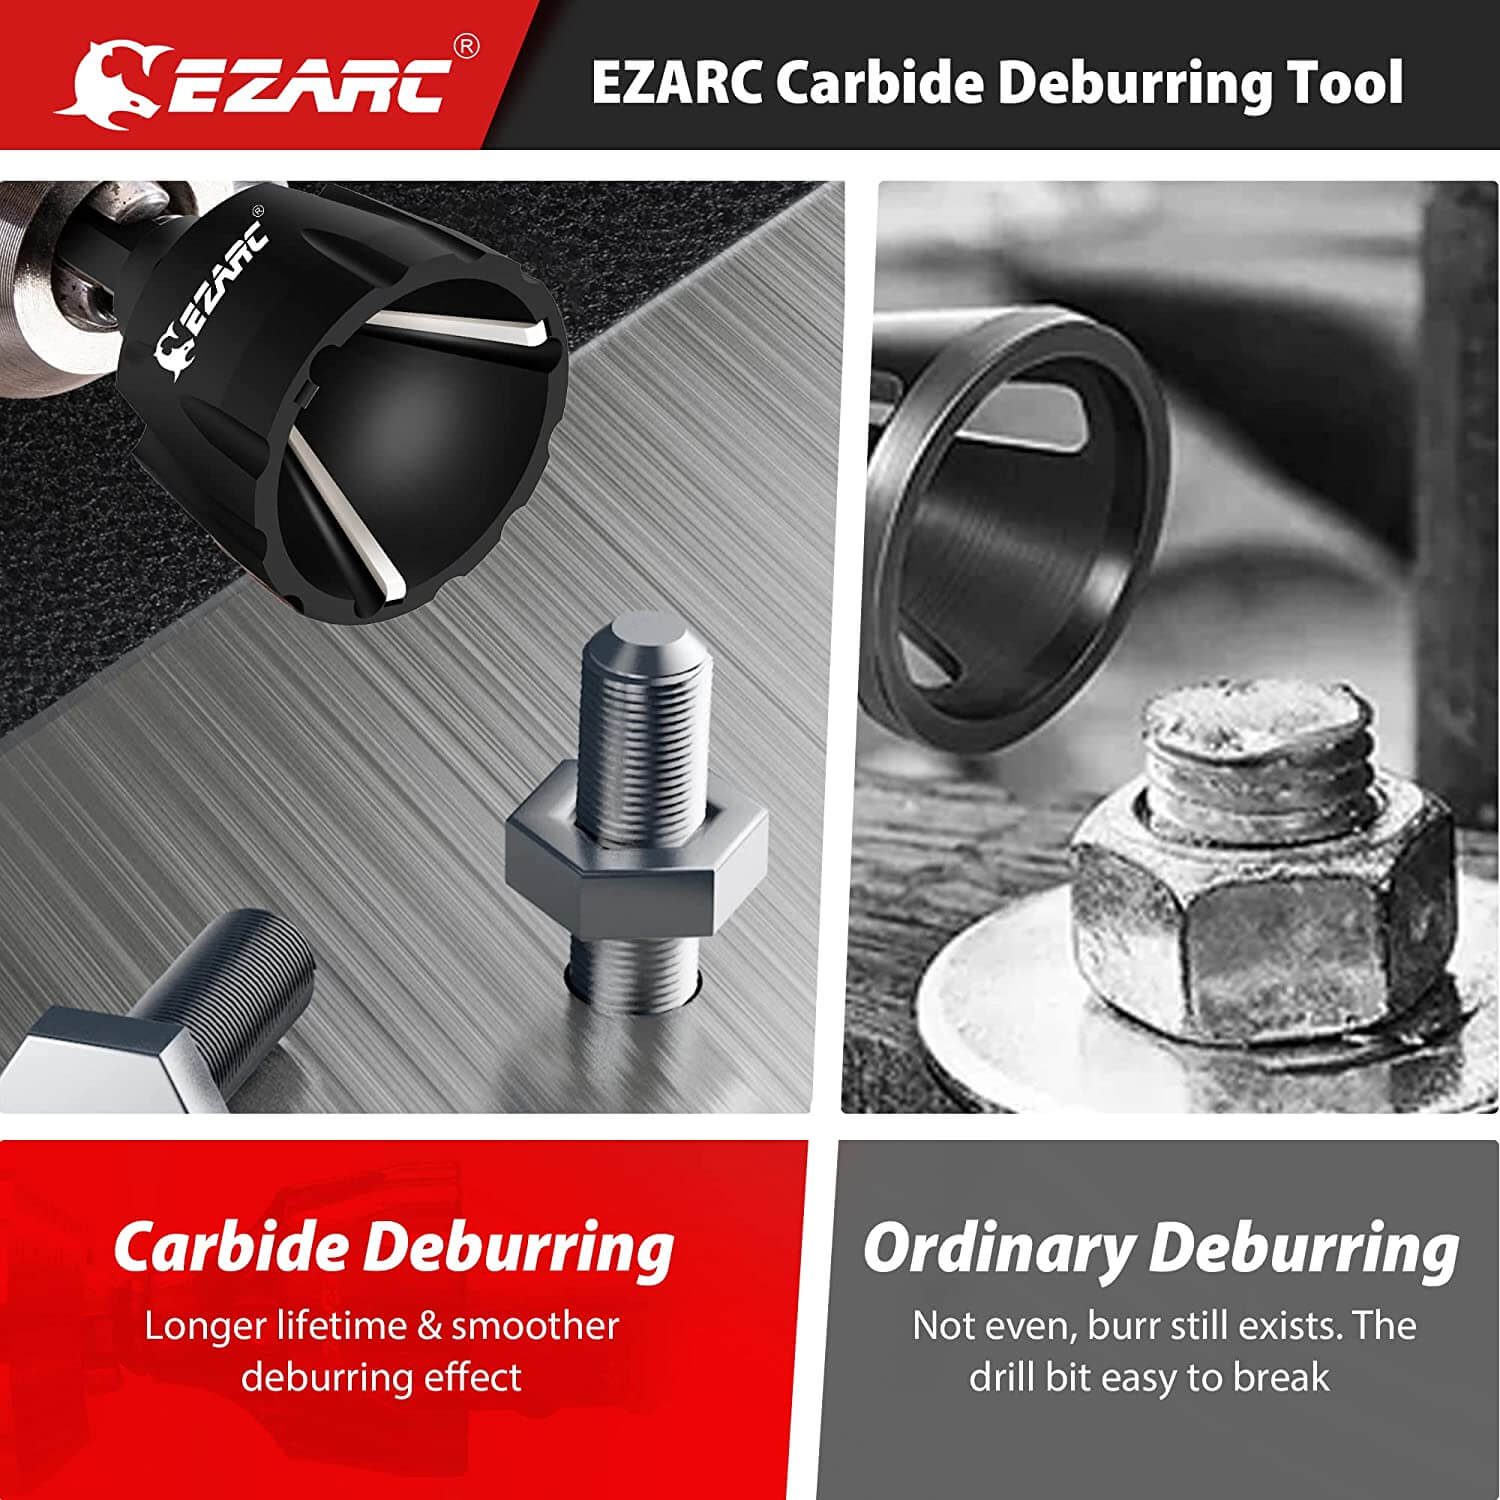 External Rotary Deburring Chamfer & Internal Countersink Chamfer Tool with 1/4" Hex Shank